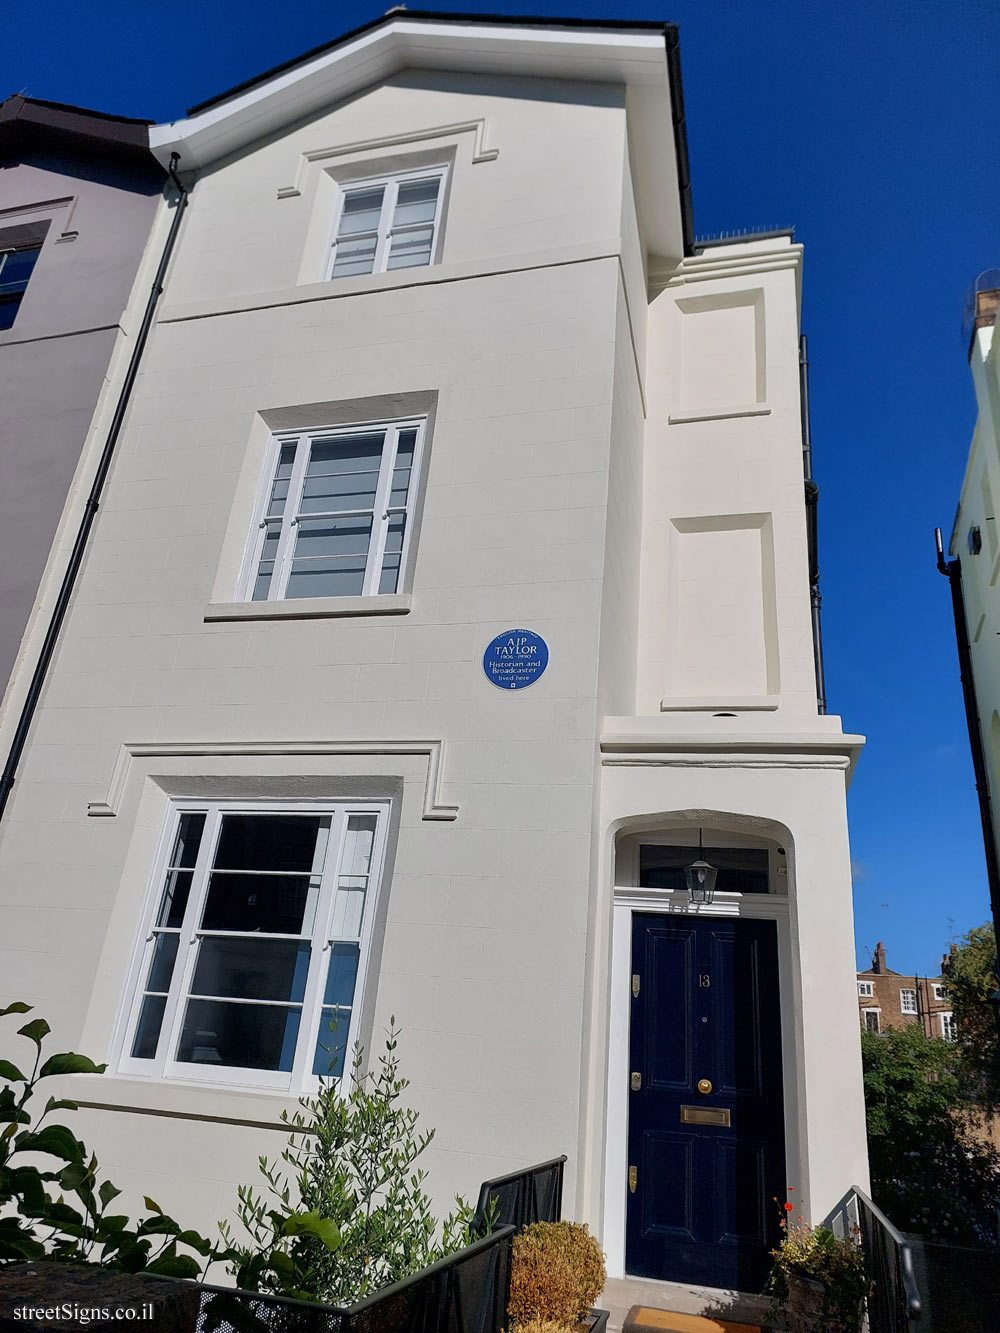 London - Commemorative plaque where historian A. J. P. Taylor lived - 13 St Mark’s Cres, London NW1 7TS, UK